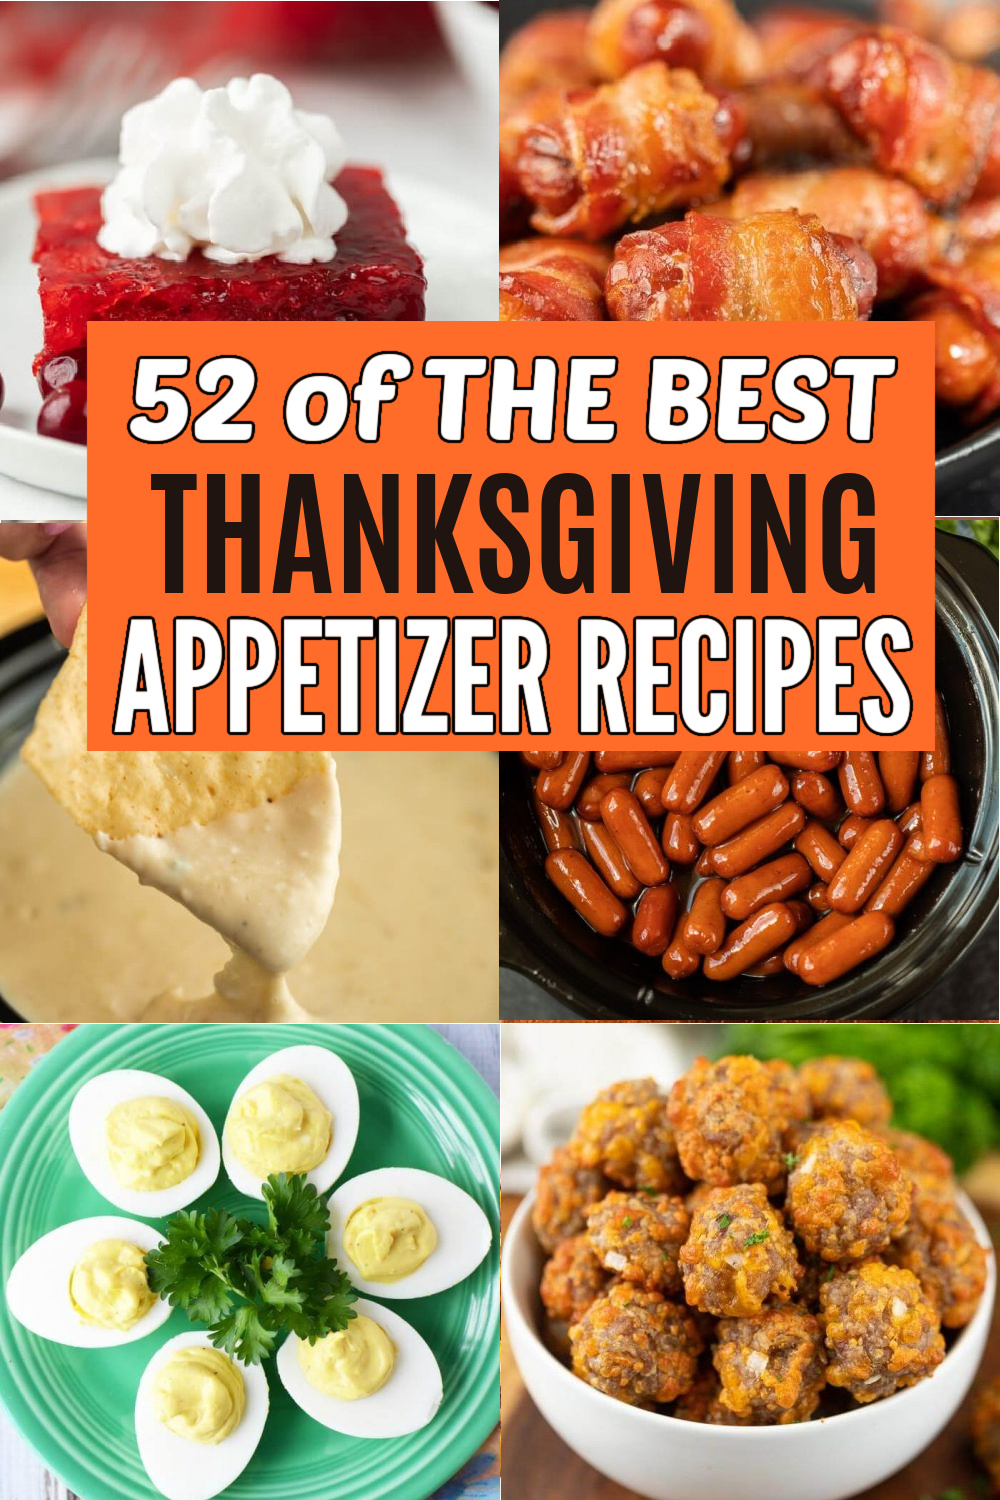 The best Thanksgiving appetizer recipes to make your holiday meal complete. Impress your guests with 52 recipes sure to be a crowd pleaser. Easy and delicious appetizer recipes. #eatingonadime #appetizers #thanksgiving